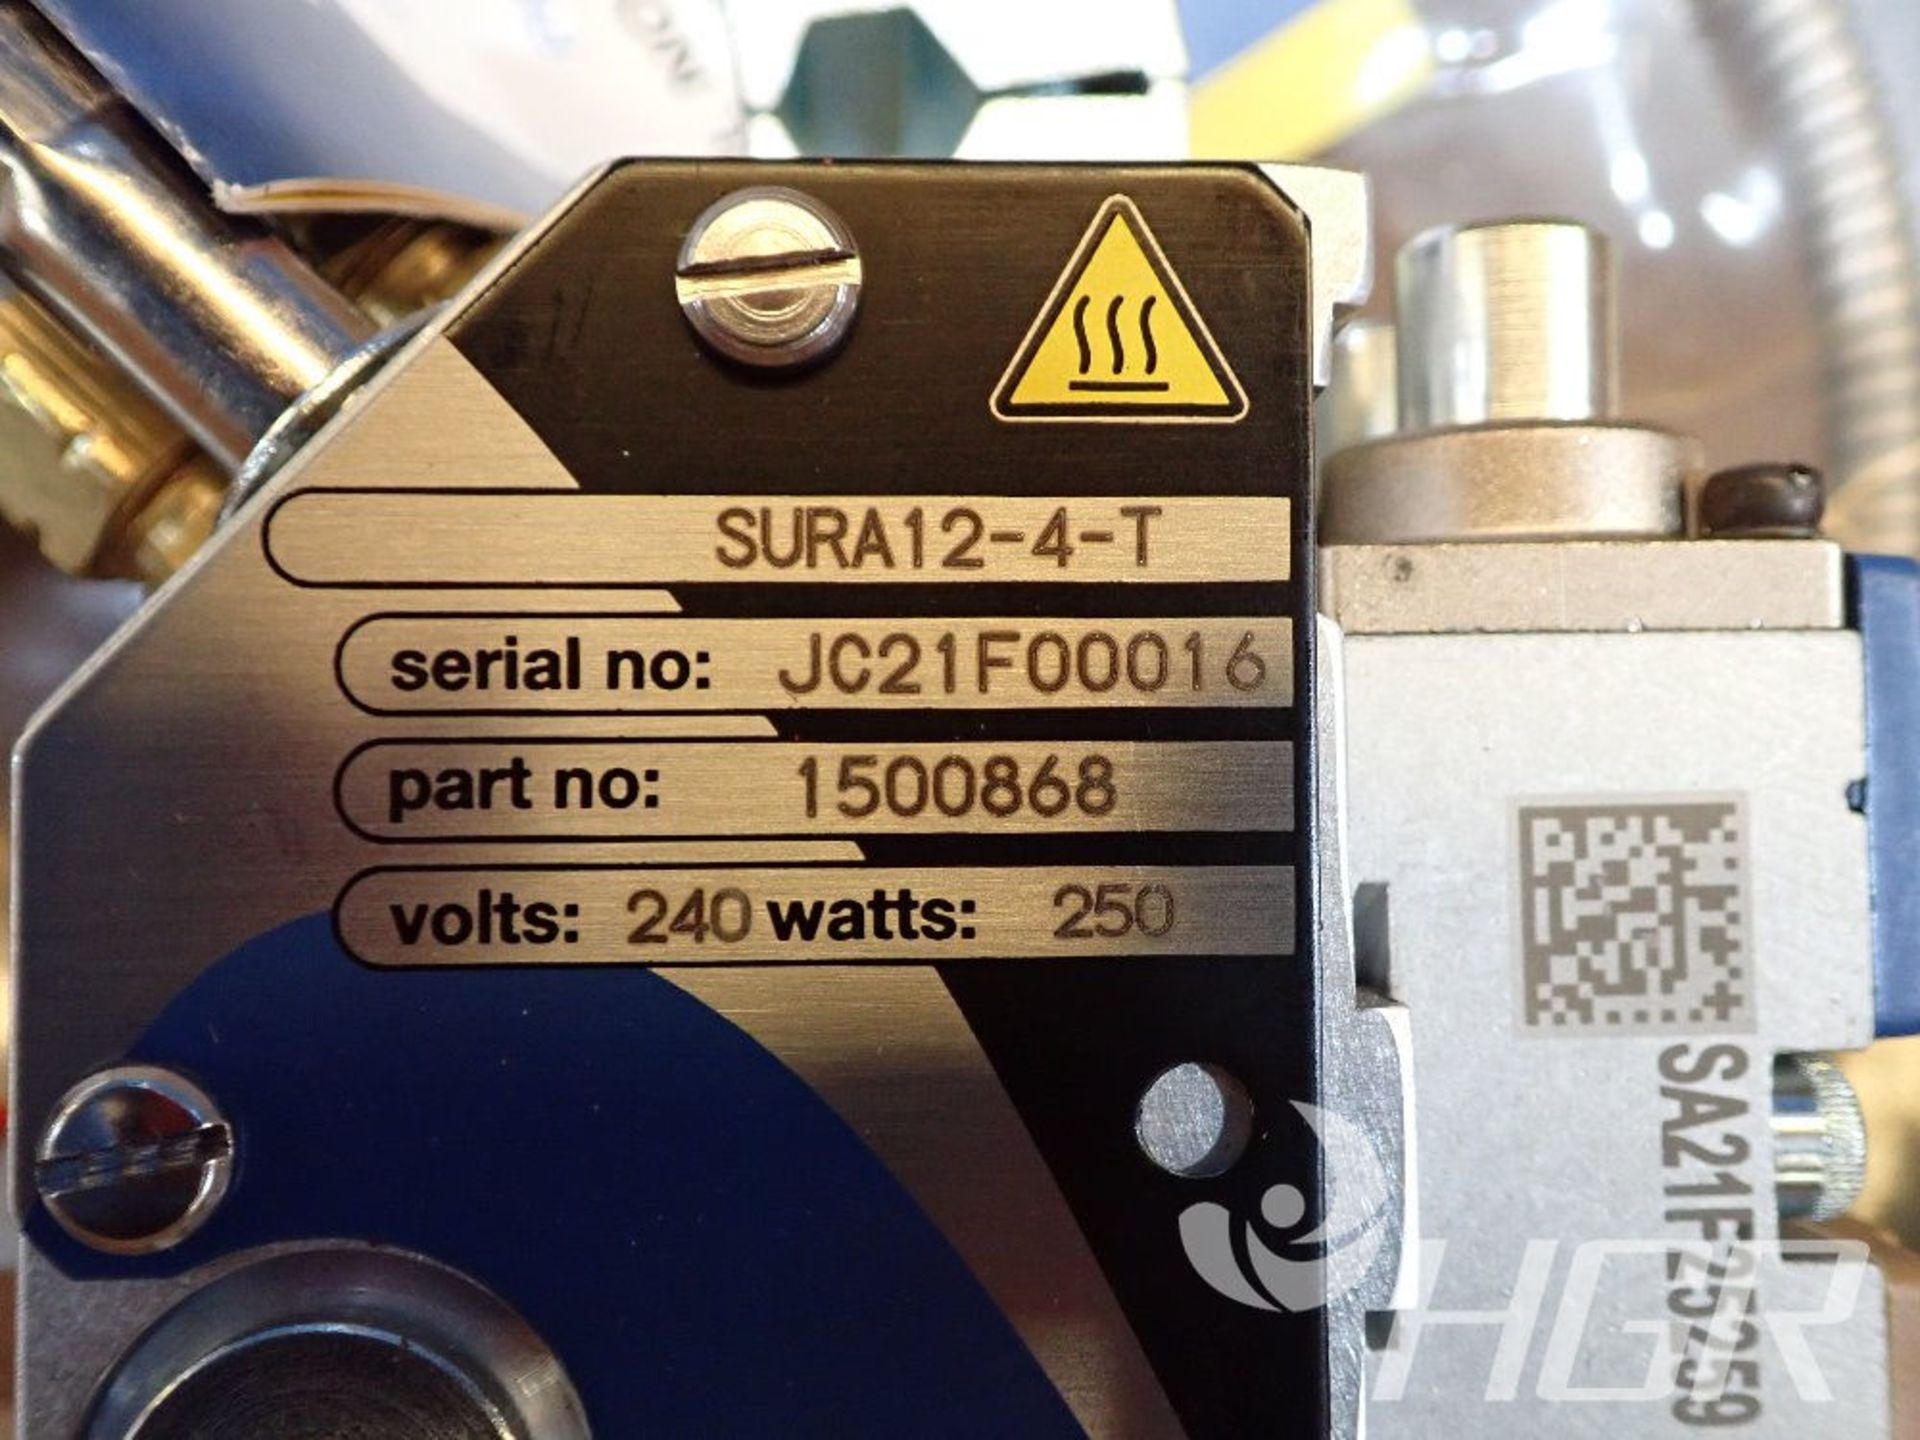 NORDSON PNUEMATIC APPLICATOR, Model SURA12-4-T, Date: n/a; s/n JC21F00016, Approx. Capacity: n/a, - Image 9 of 12